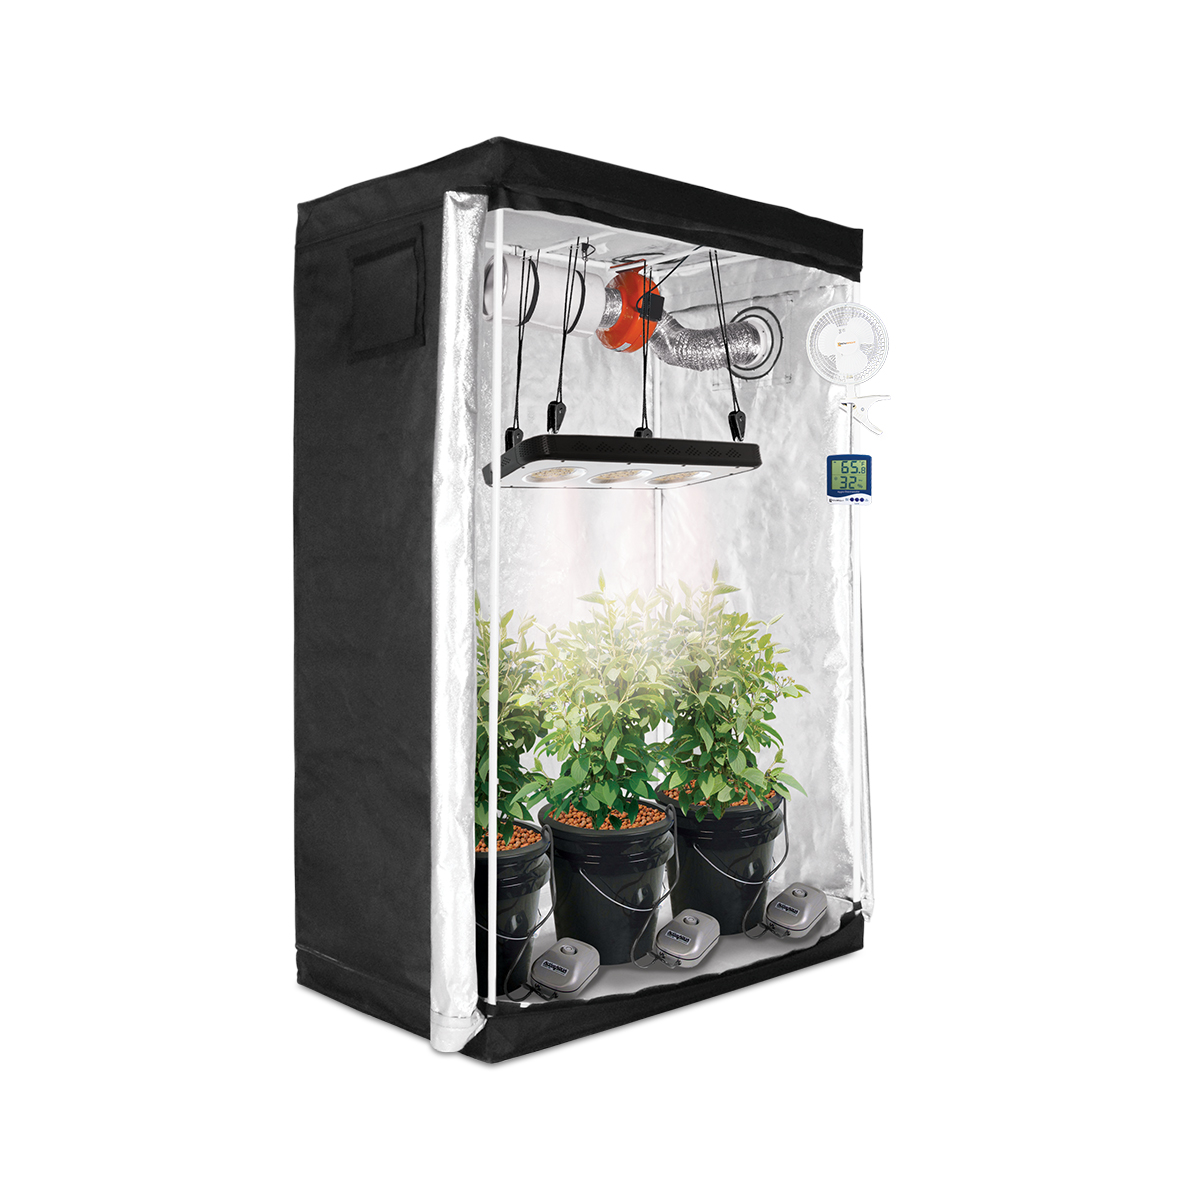 2x4 Grow Tent Kit Small Dwc Hydro System With Led Grow Lights